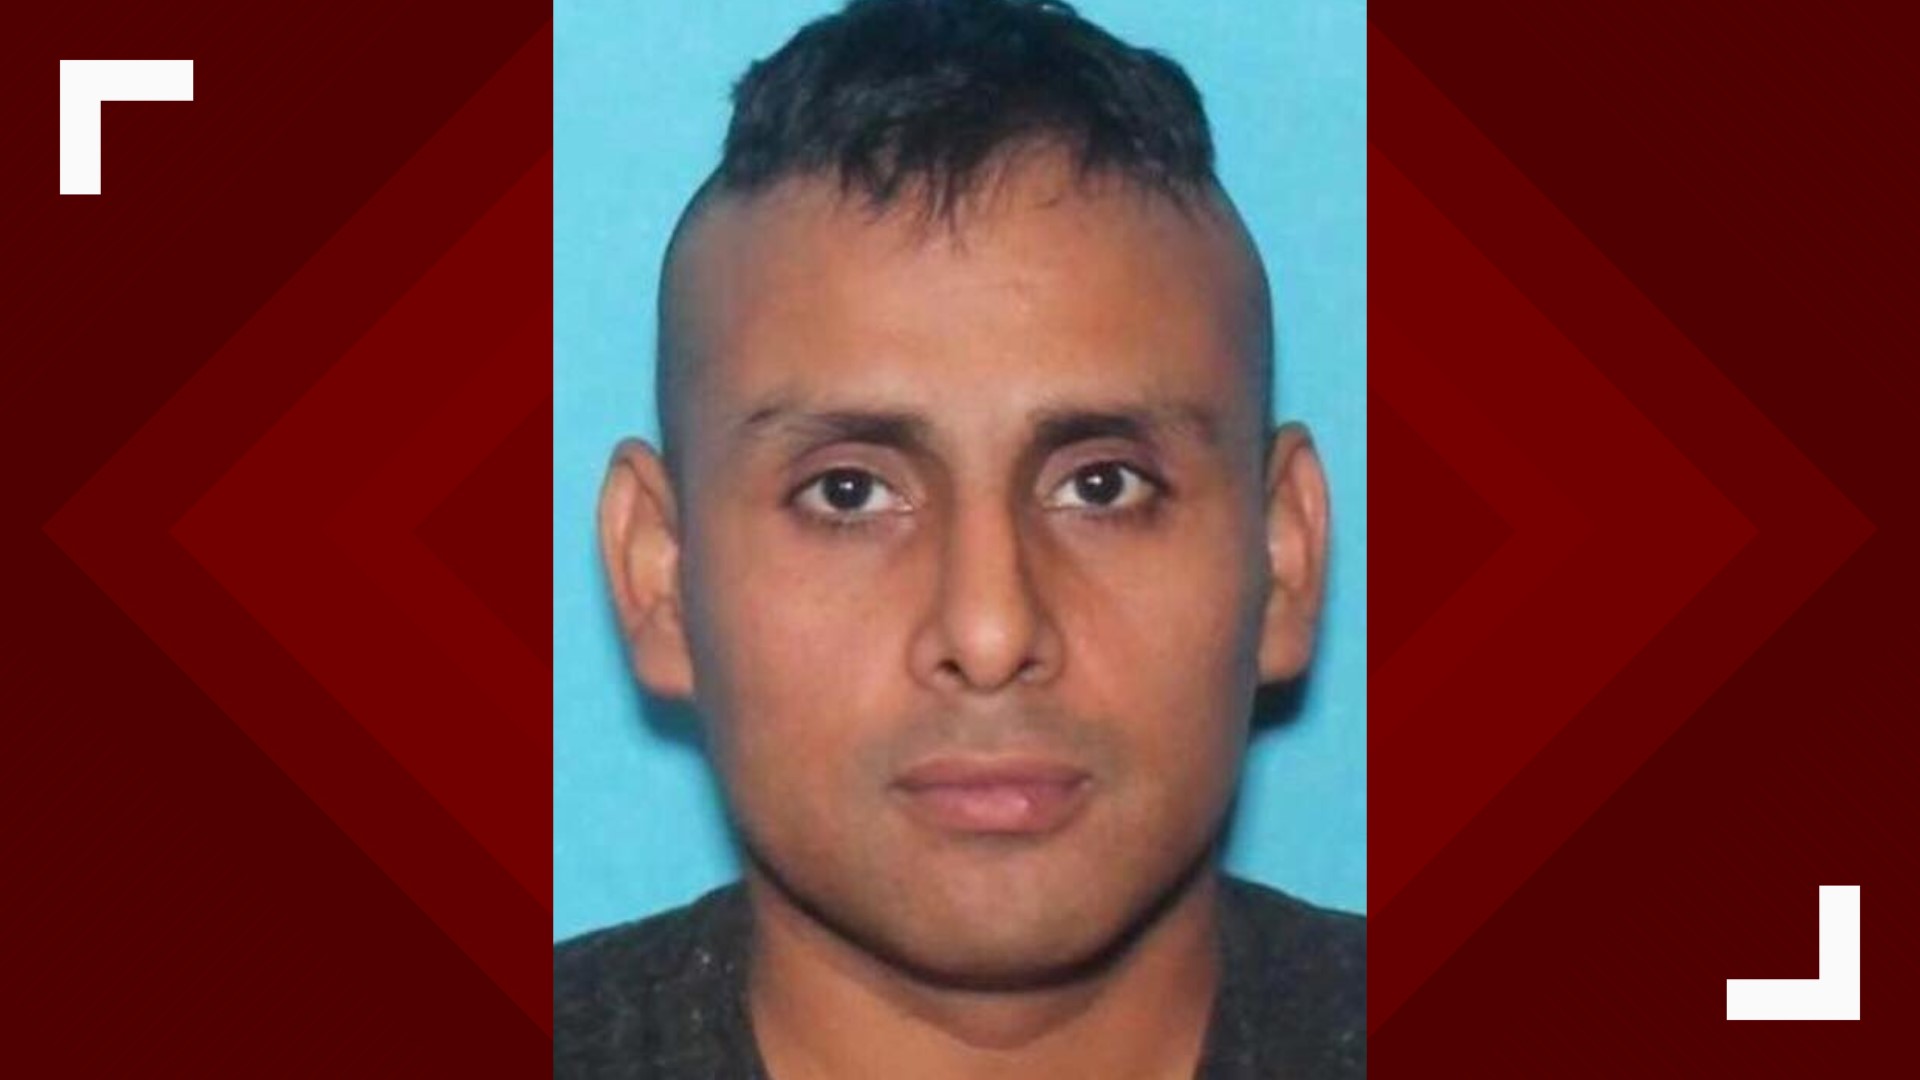 Texas Rangers are searching for a suspect wanted for five felony charges.